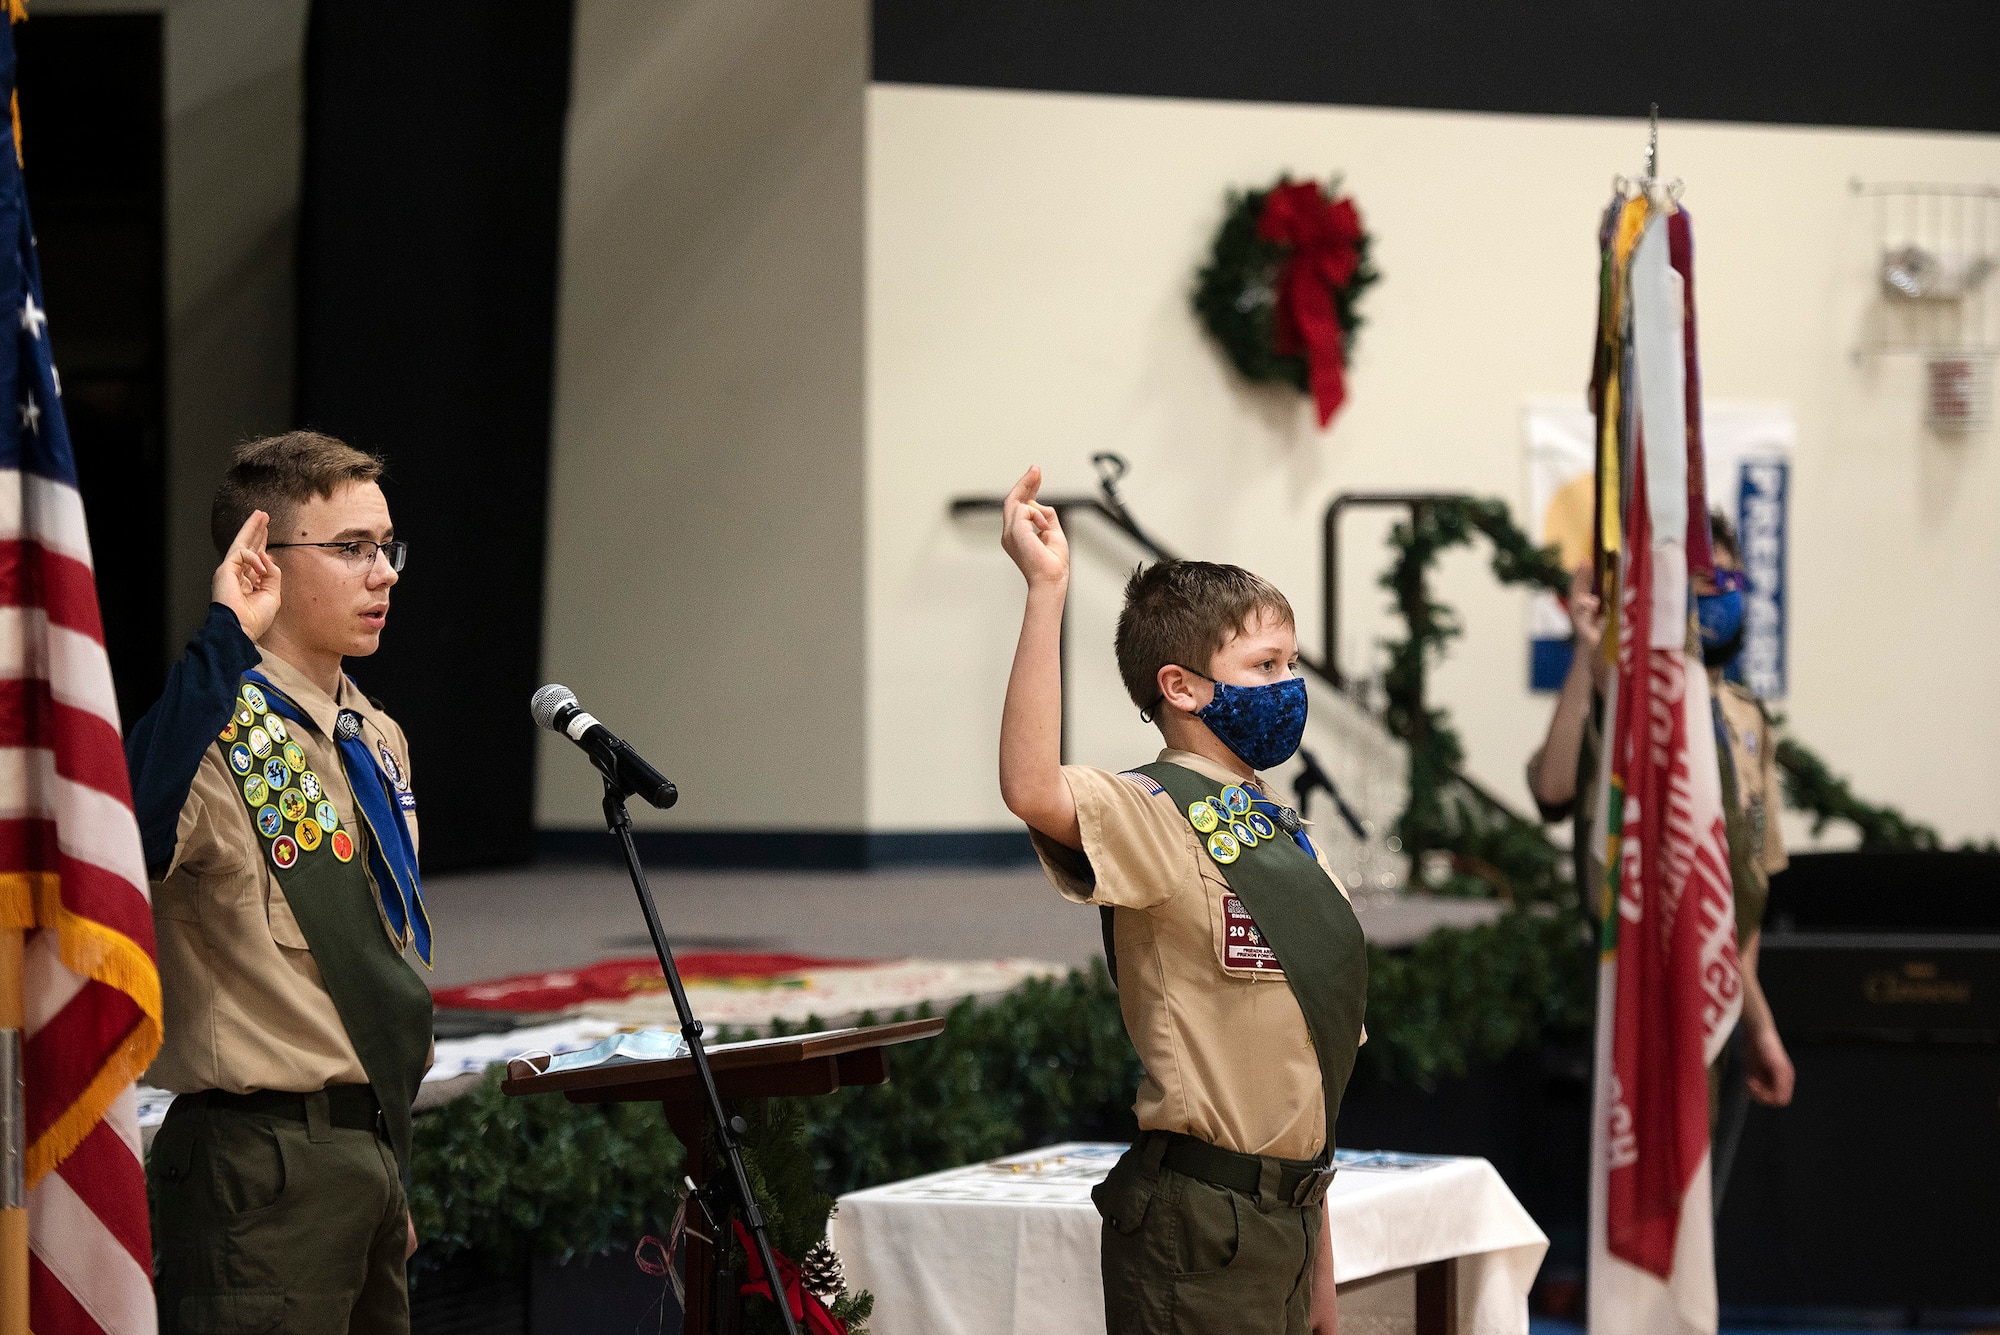 Wills Oberg (right) leads Boy Scout Troop 162 in the Scout Oath at the start of an event Dec. 13, 2021, in Fairborn, Ohio, marking the troop’s 75th anniversary. For the first 60 years of its existence, the troop was chartered by Wright-Patterson Air Force Base and still has a strong connection. (U.S. Air Force photo by R.J. Oriez)